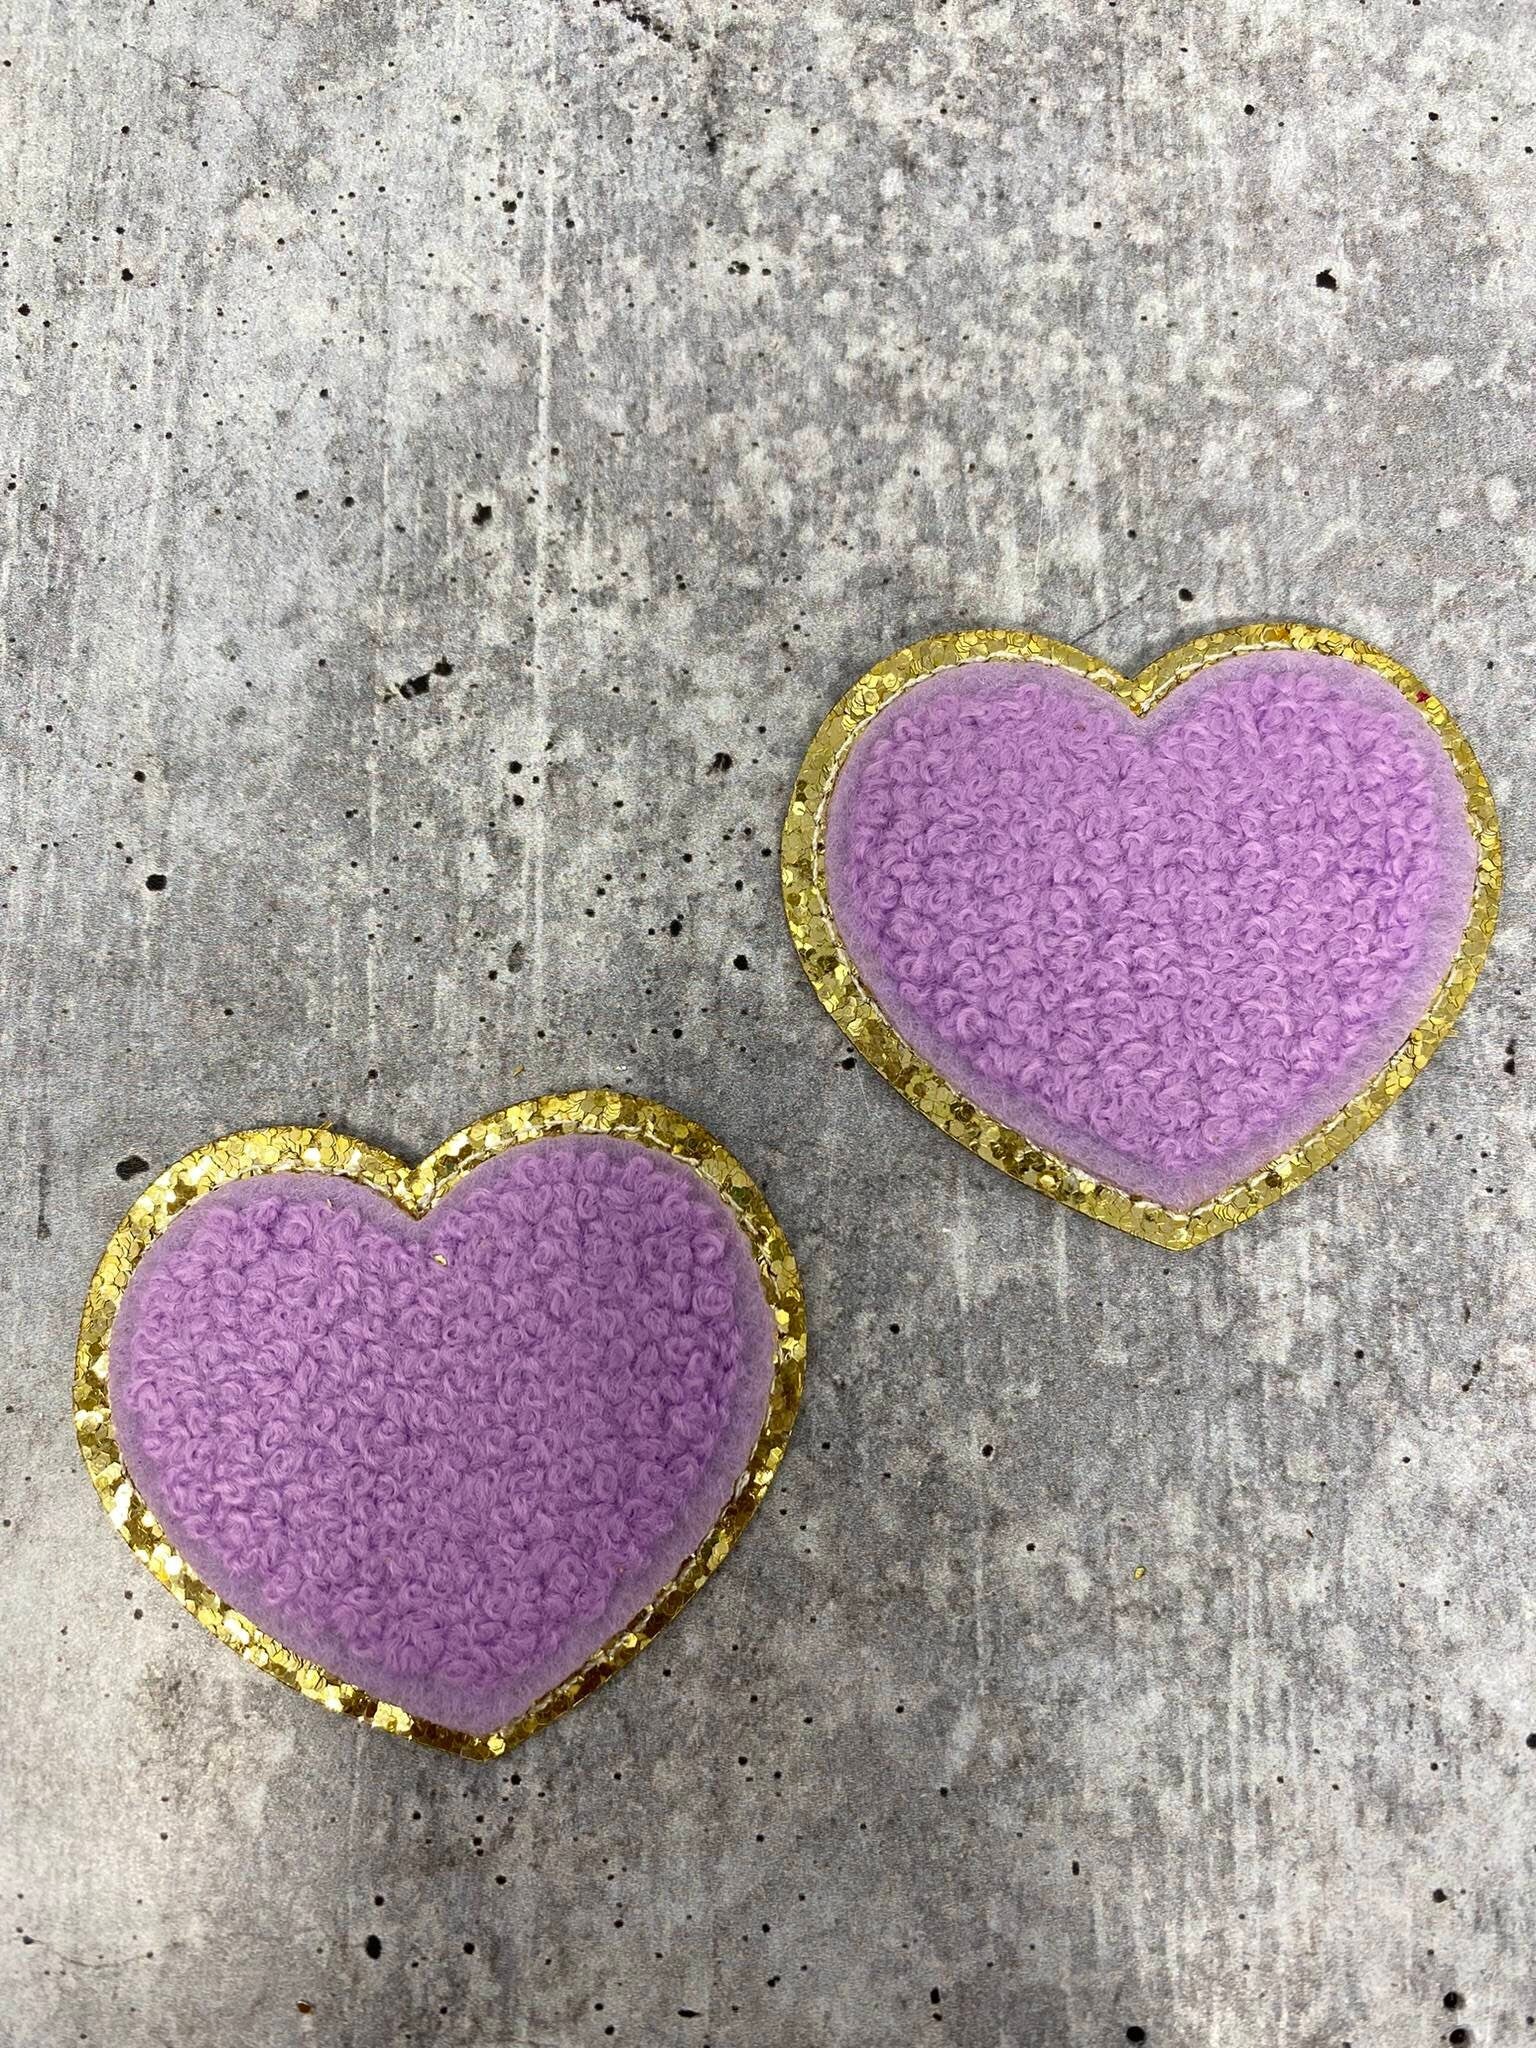 New: Purple, Chenille 1-pc "Heart Patch" w/Gold Glitter, Size 2.5", Love Patch with Iron-on Backing, Fuzzy Applique, Iron-on Patch for Girls